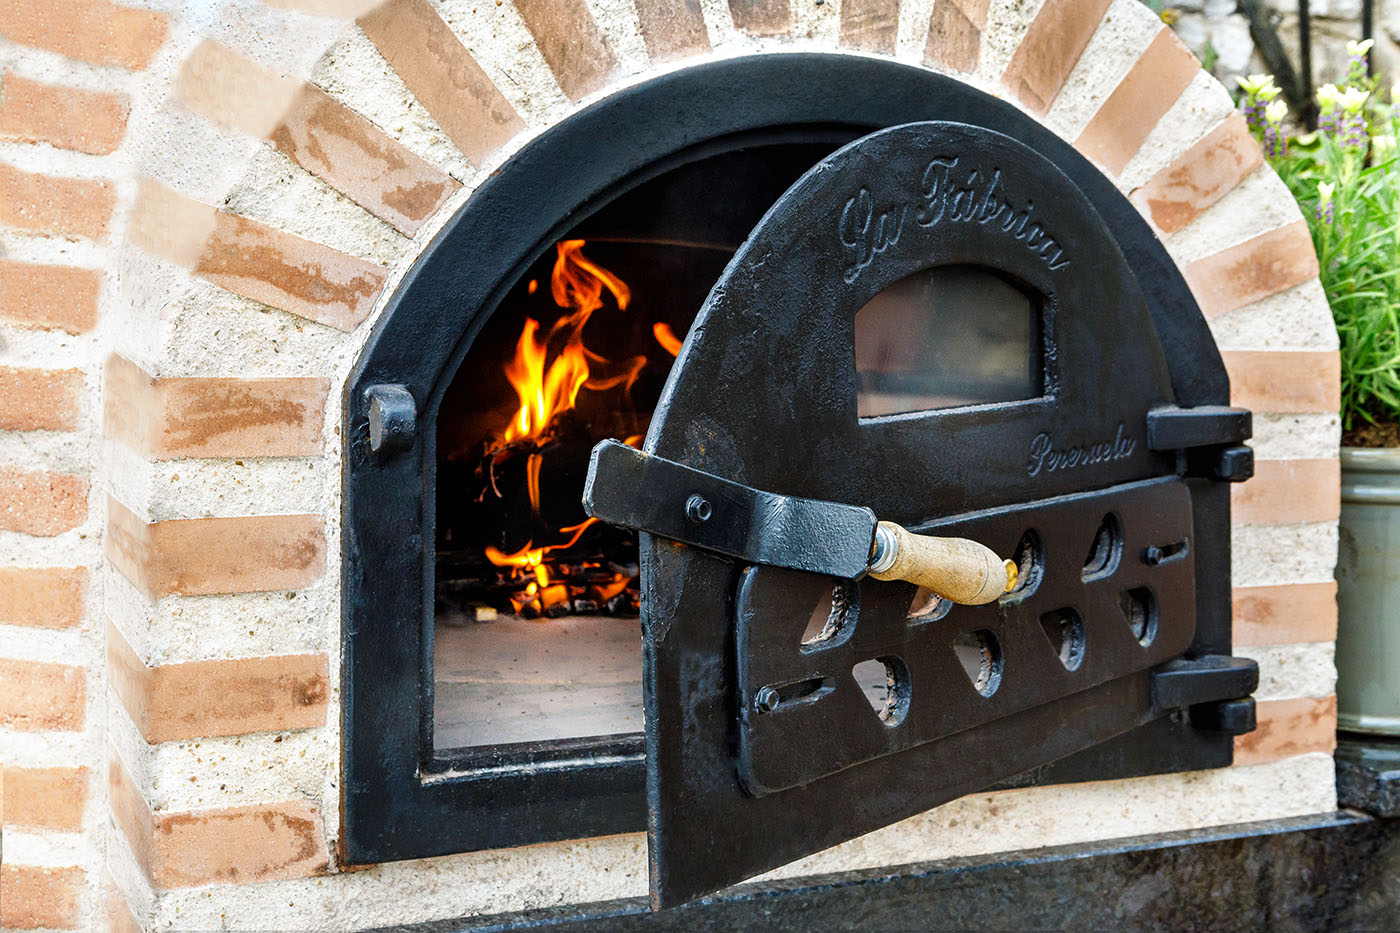 https://www.fuegowoodfiredovens.com/wp-content/uploads/2018/08/how-to-light-your-wood-fired-pizza-oven-5.jpg